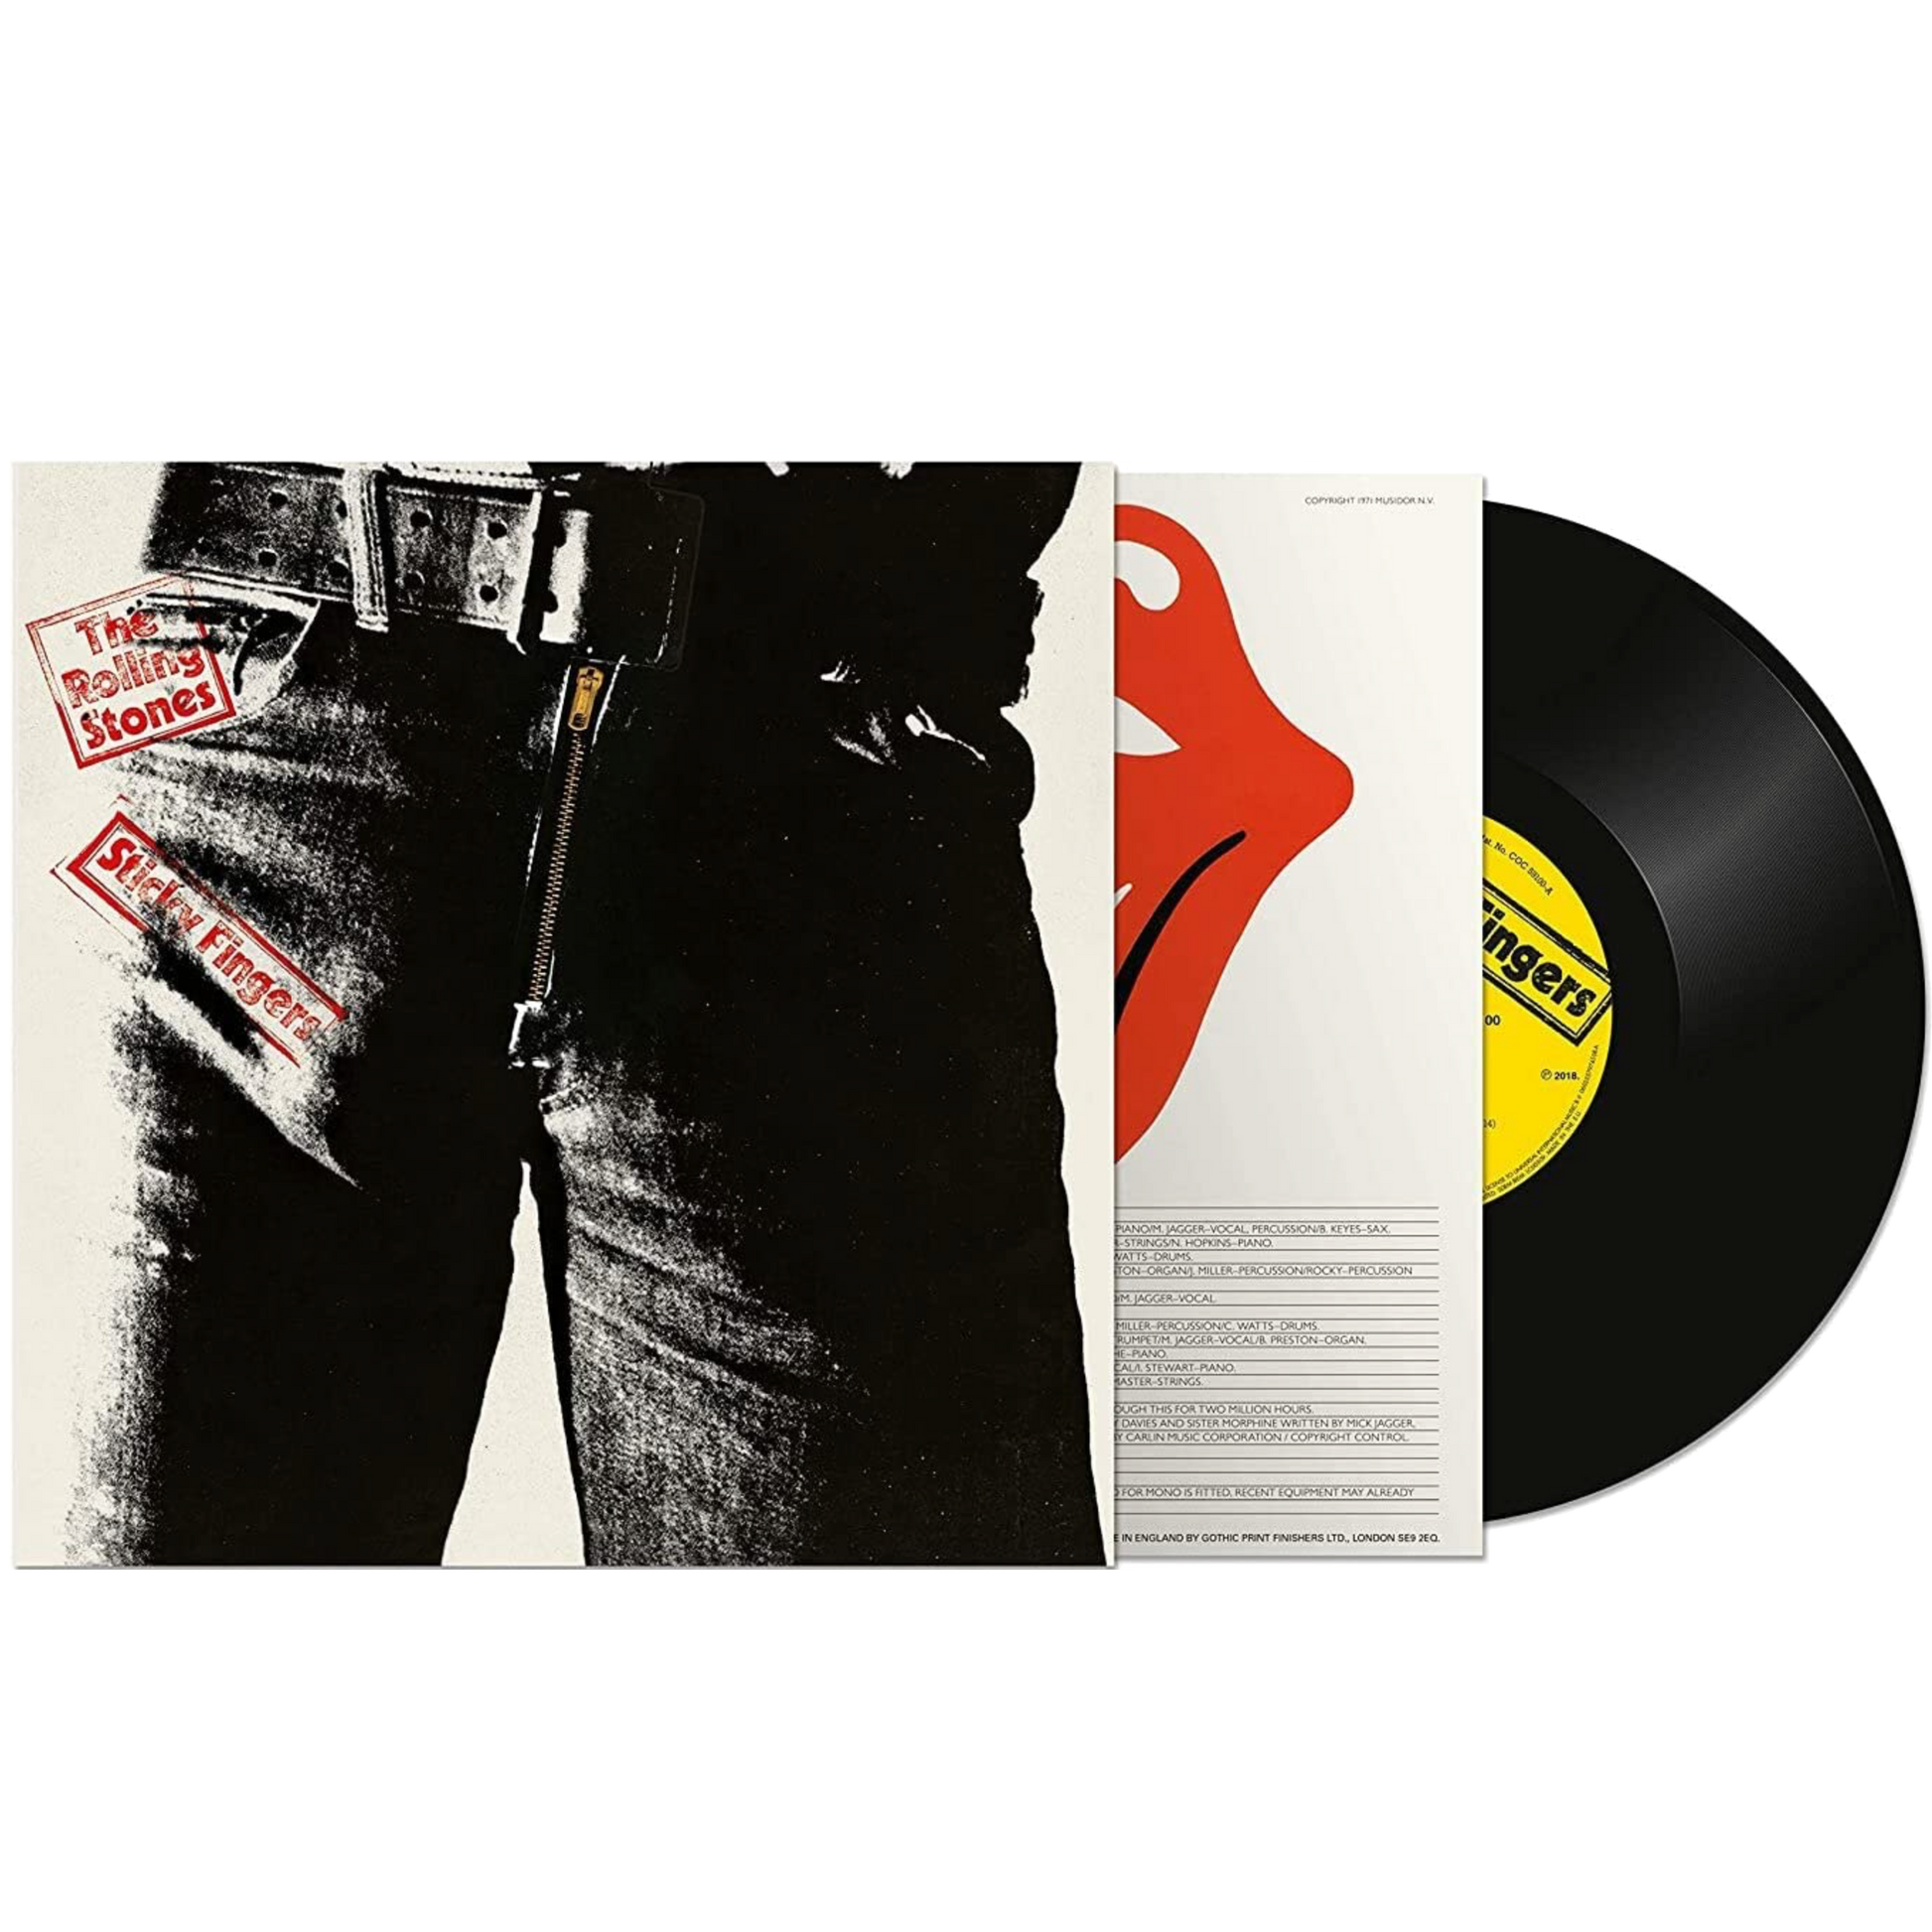 The Rolling Stones - Sticky Fingers (Import, Half-Speed Mastered, 180 Gram) (LP) - Joco Records